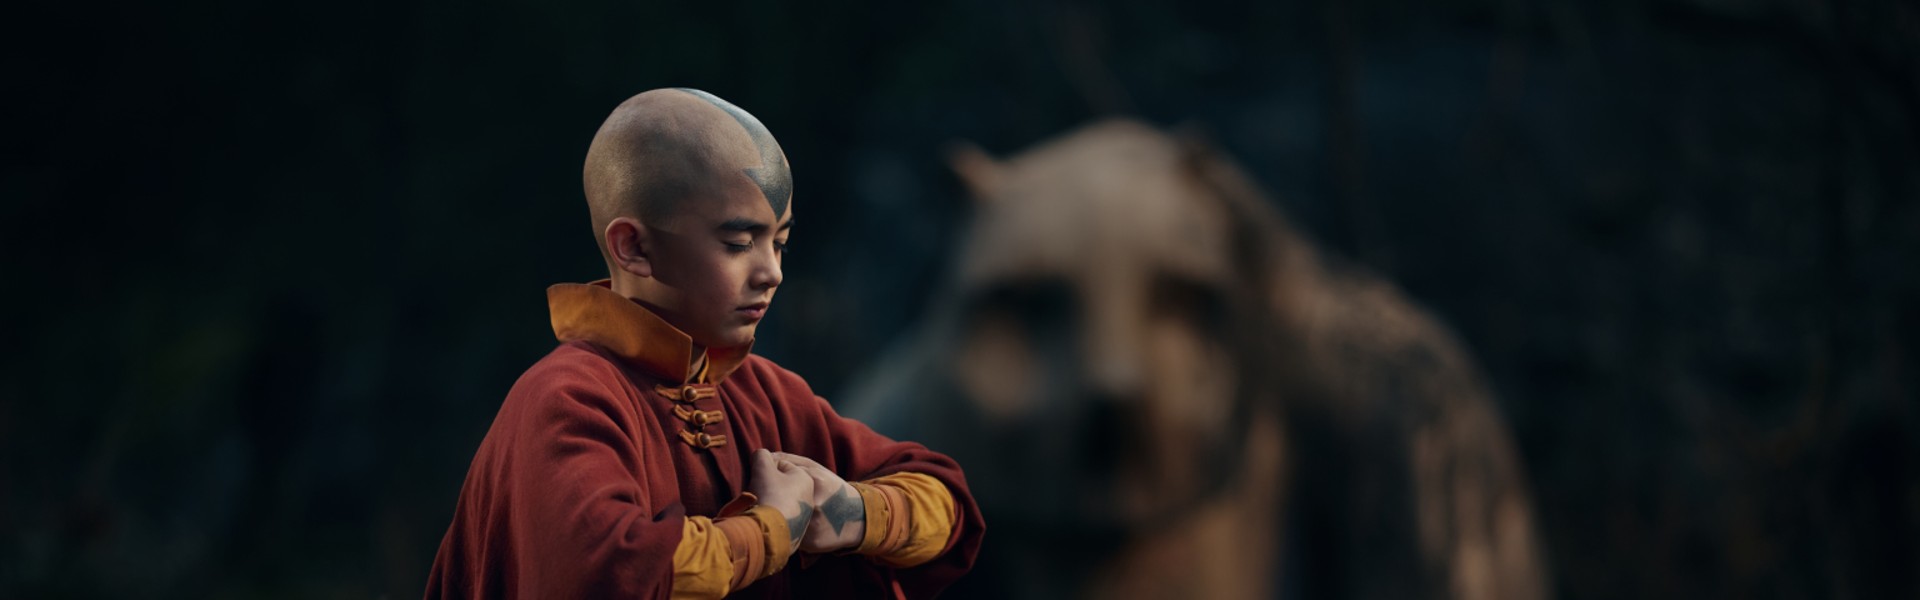 “Avatar: The Last Airbender” in New Photos: Meet the Mechanist, Jet, and Suki. This Is How Netflix’s Series Is Shaping Up